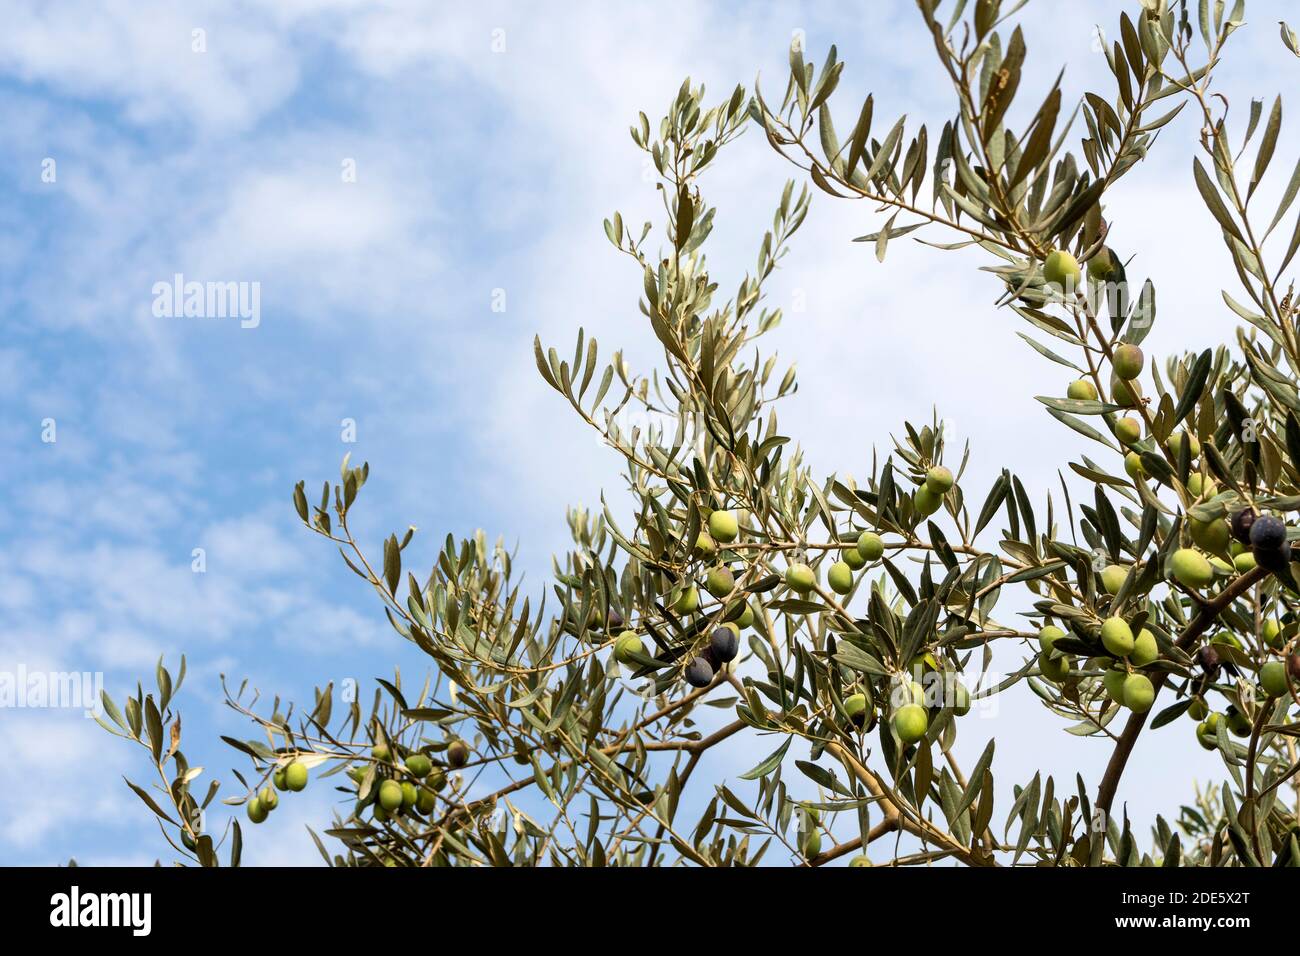 Olive tree (olea europaea) with green olives on branches Stock Photo